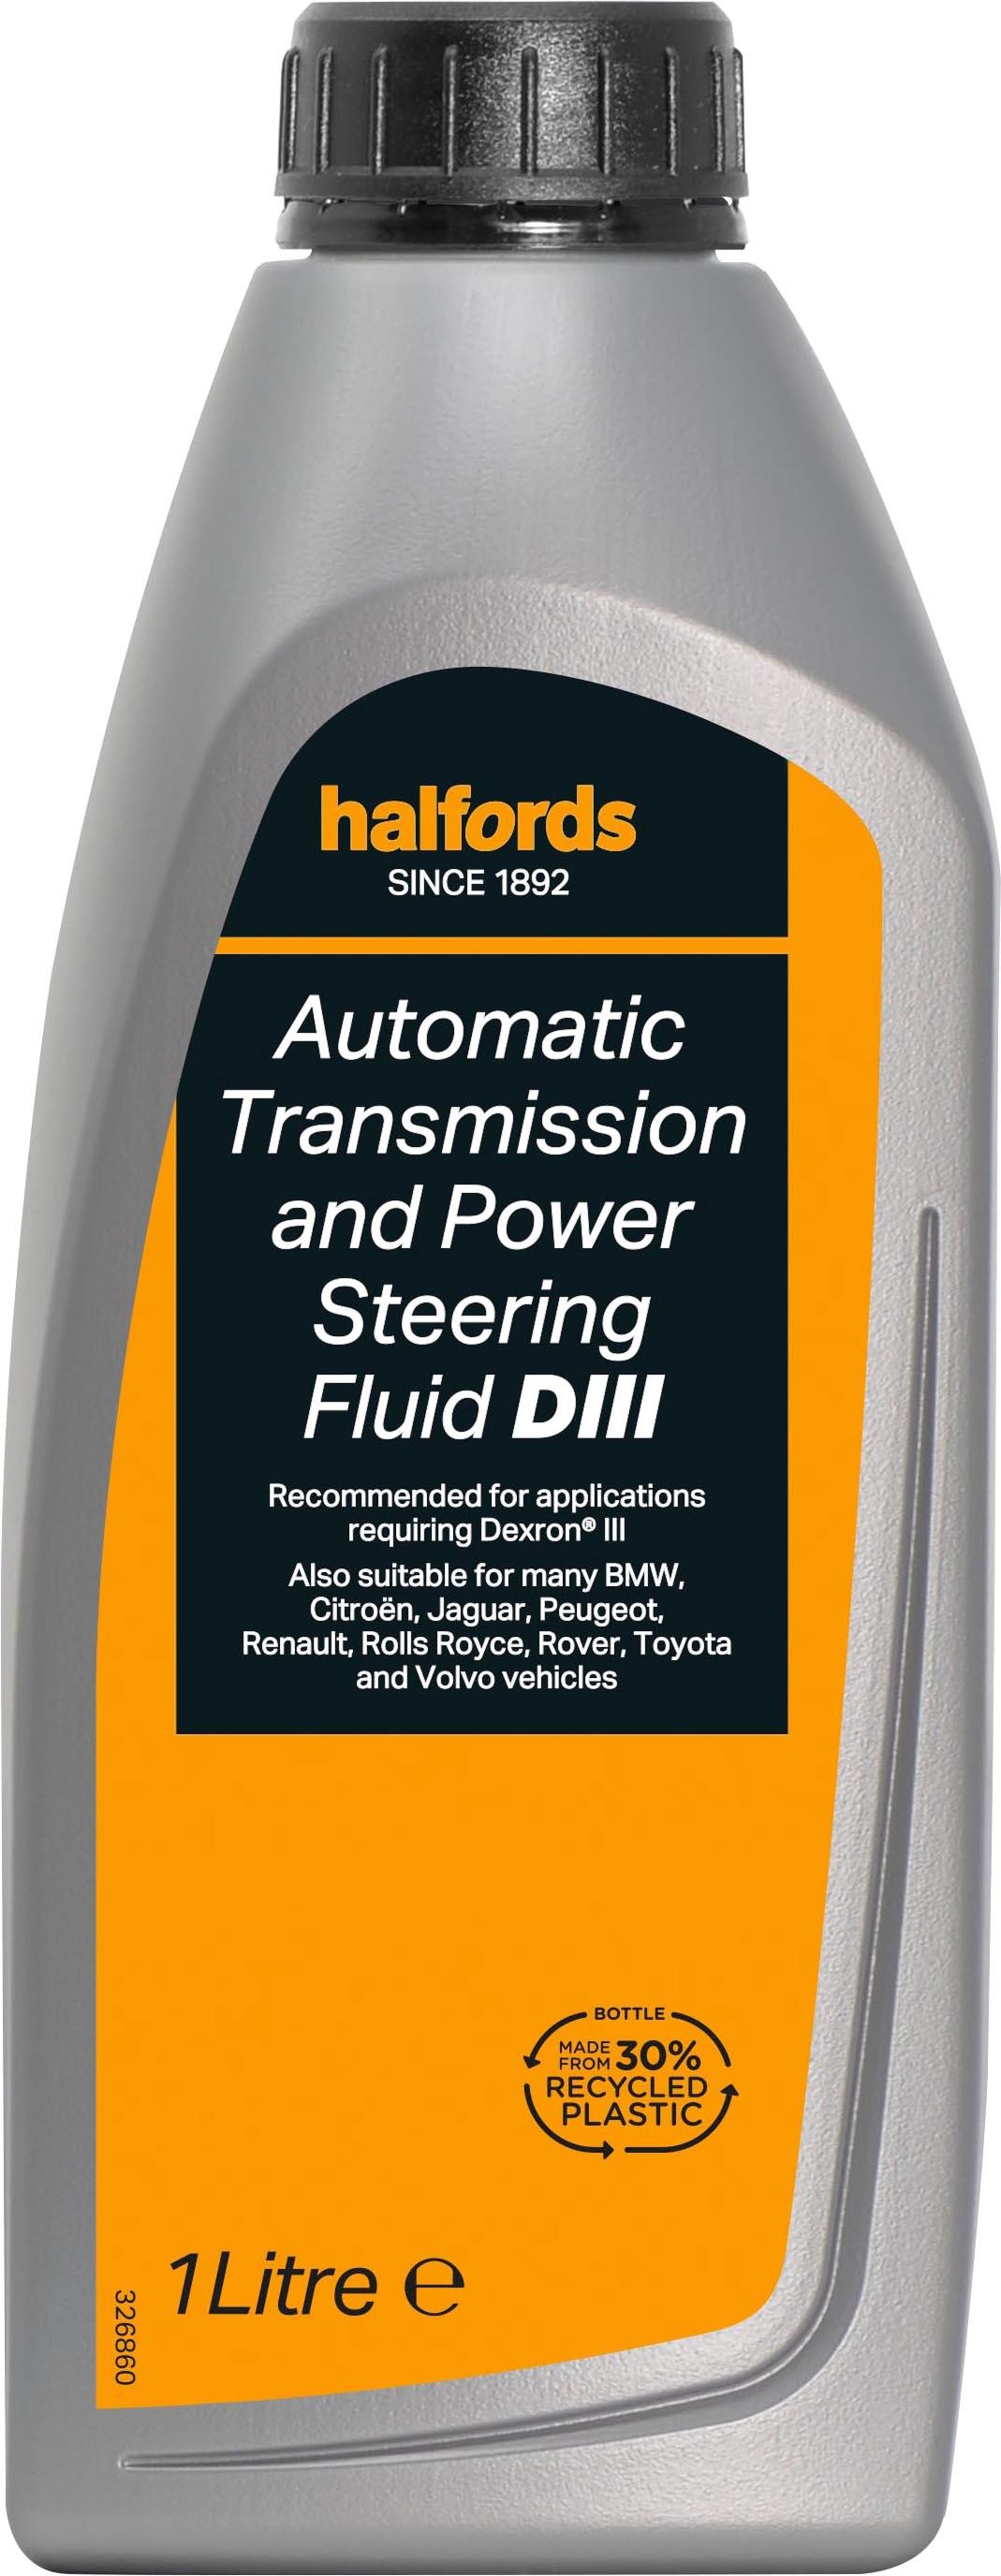 Halfords Automatic Transmission & Power Steering Fluid Diii 1L